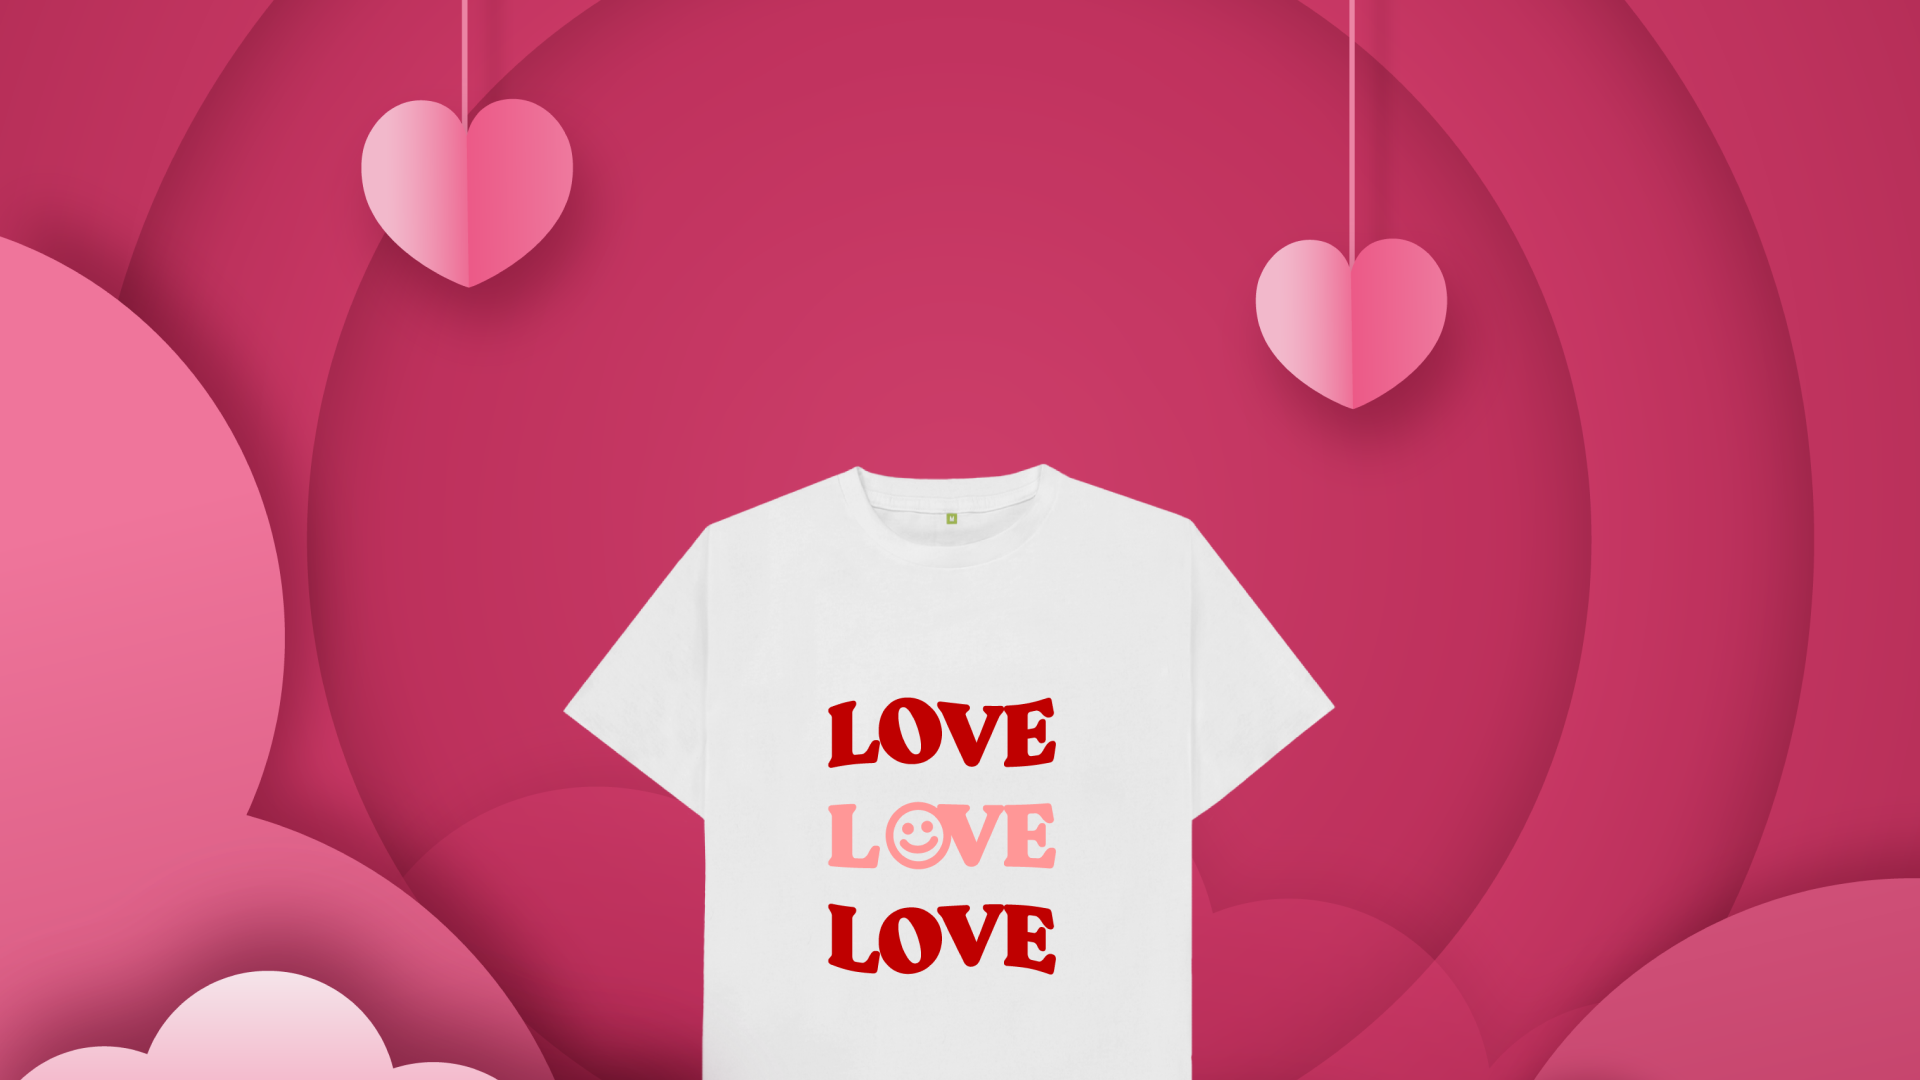 A t-shirt with love written with a pink back ground with hearts